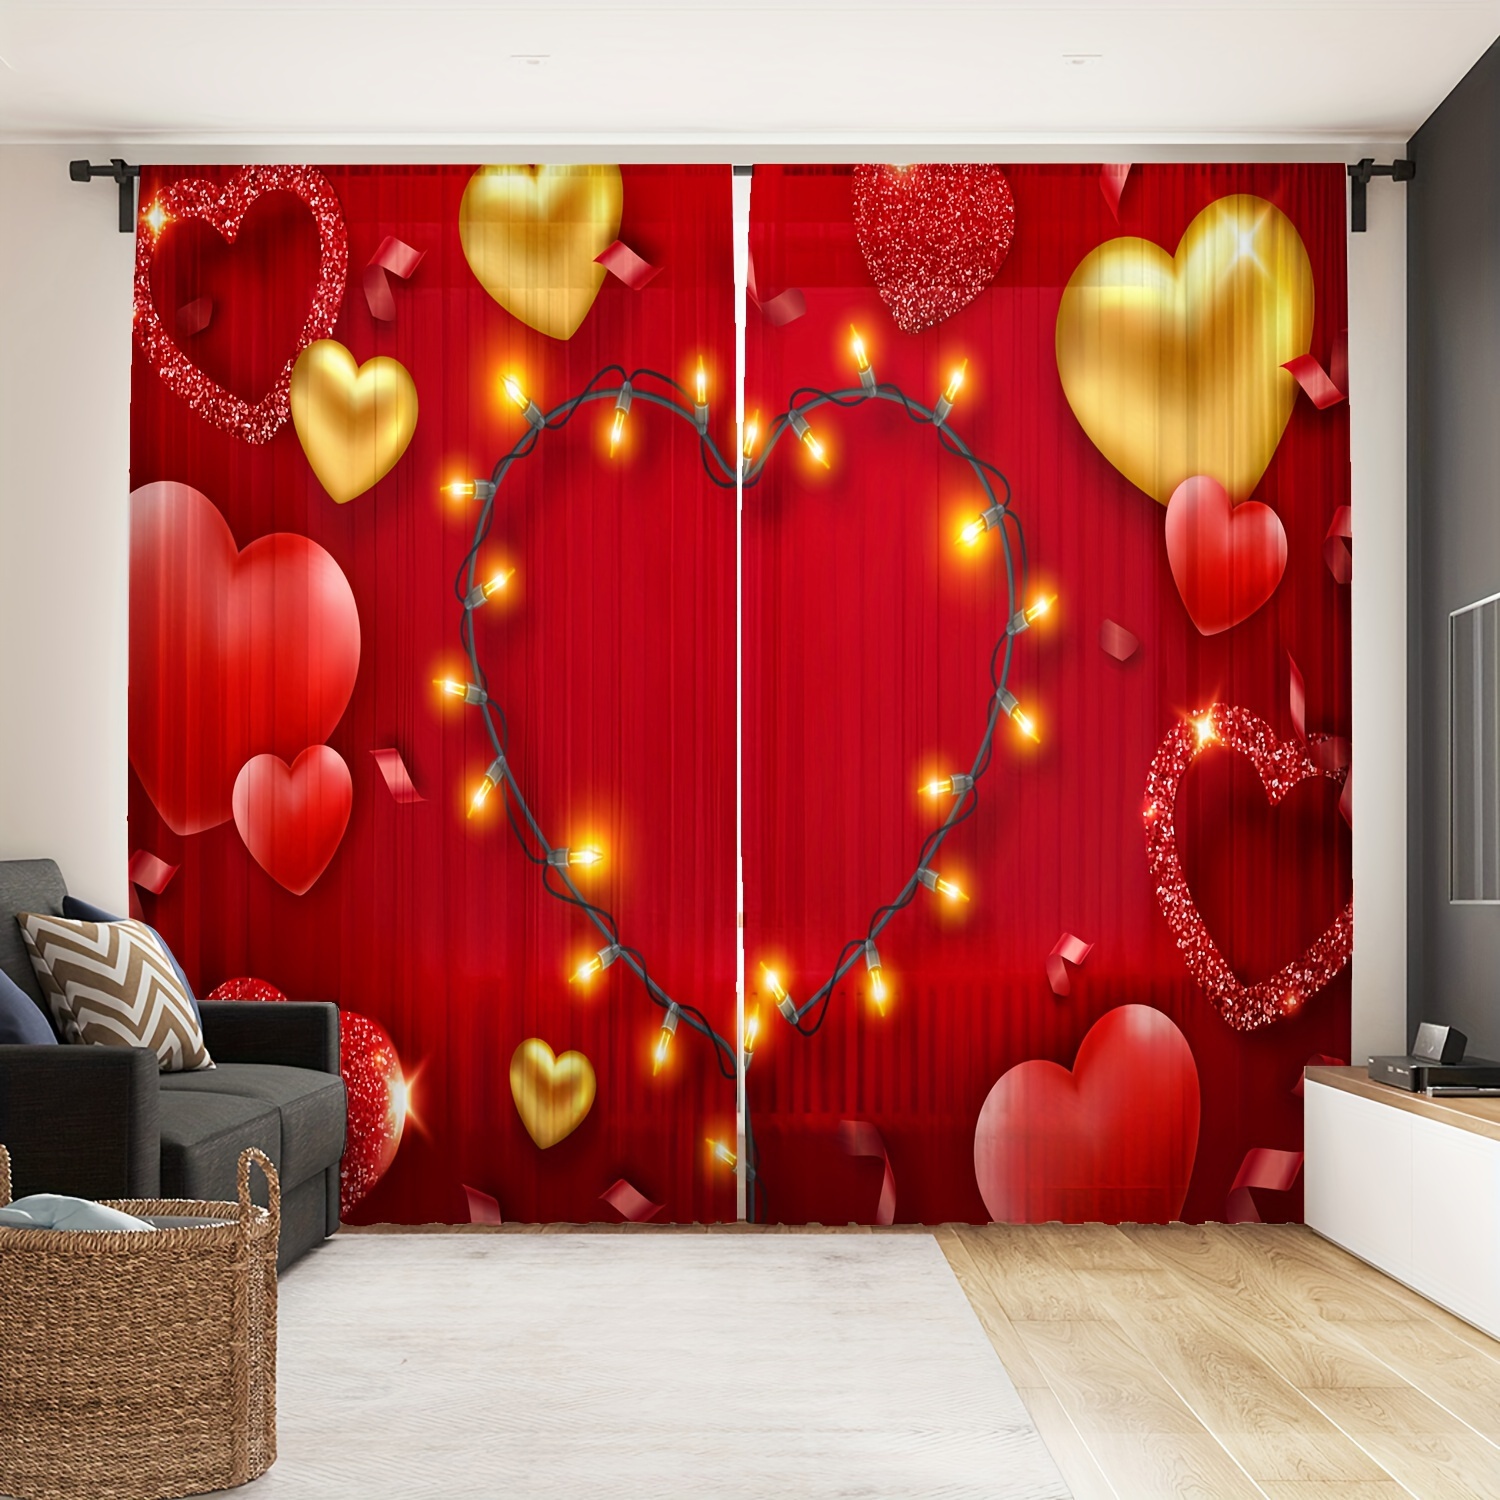 Red Heart Fabric, Wallpaper and Home Decor